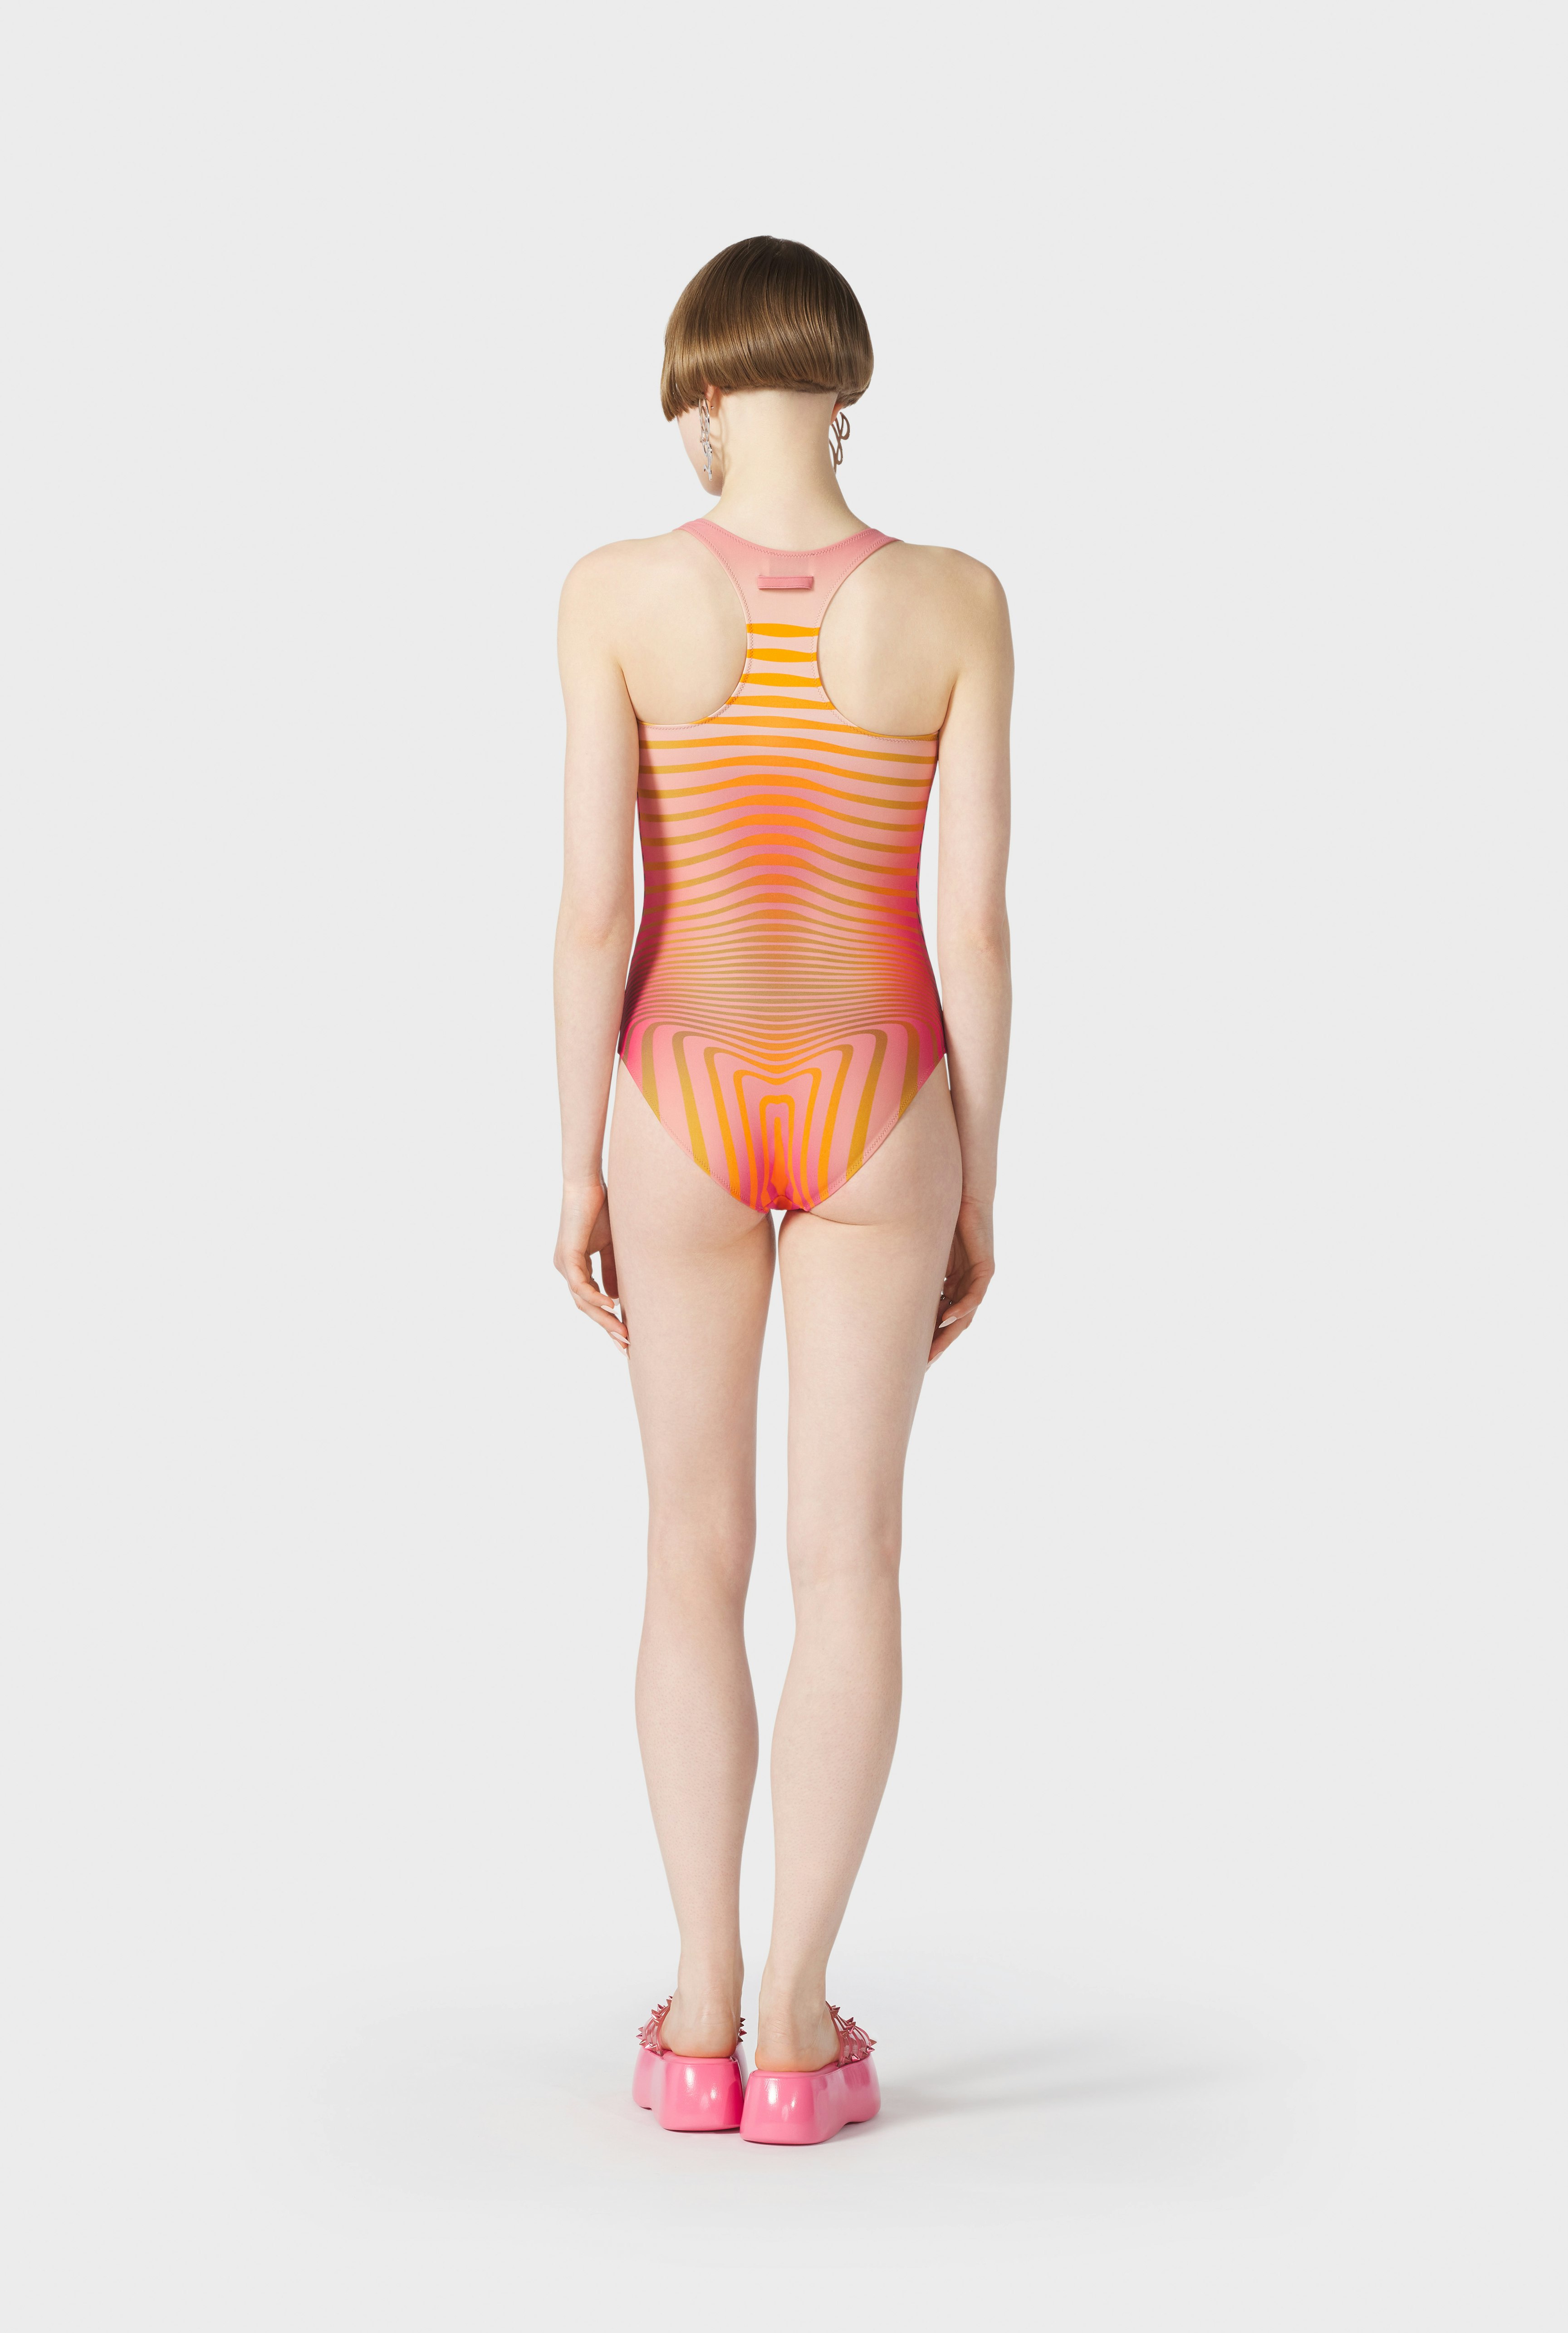 The Red Body Morphing Swimsuit